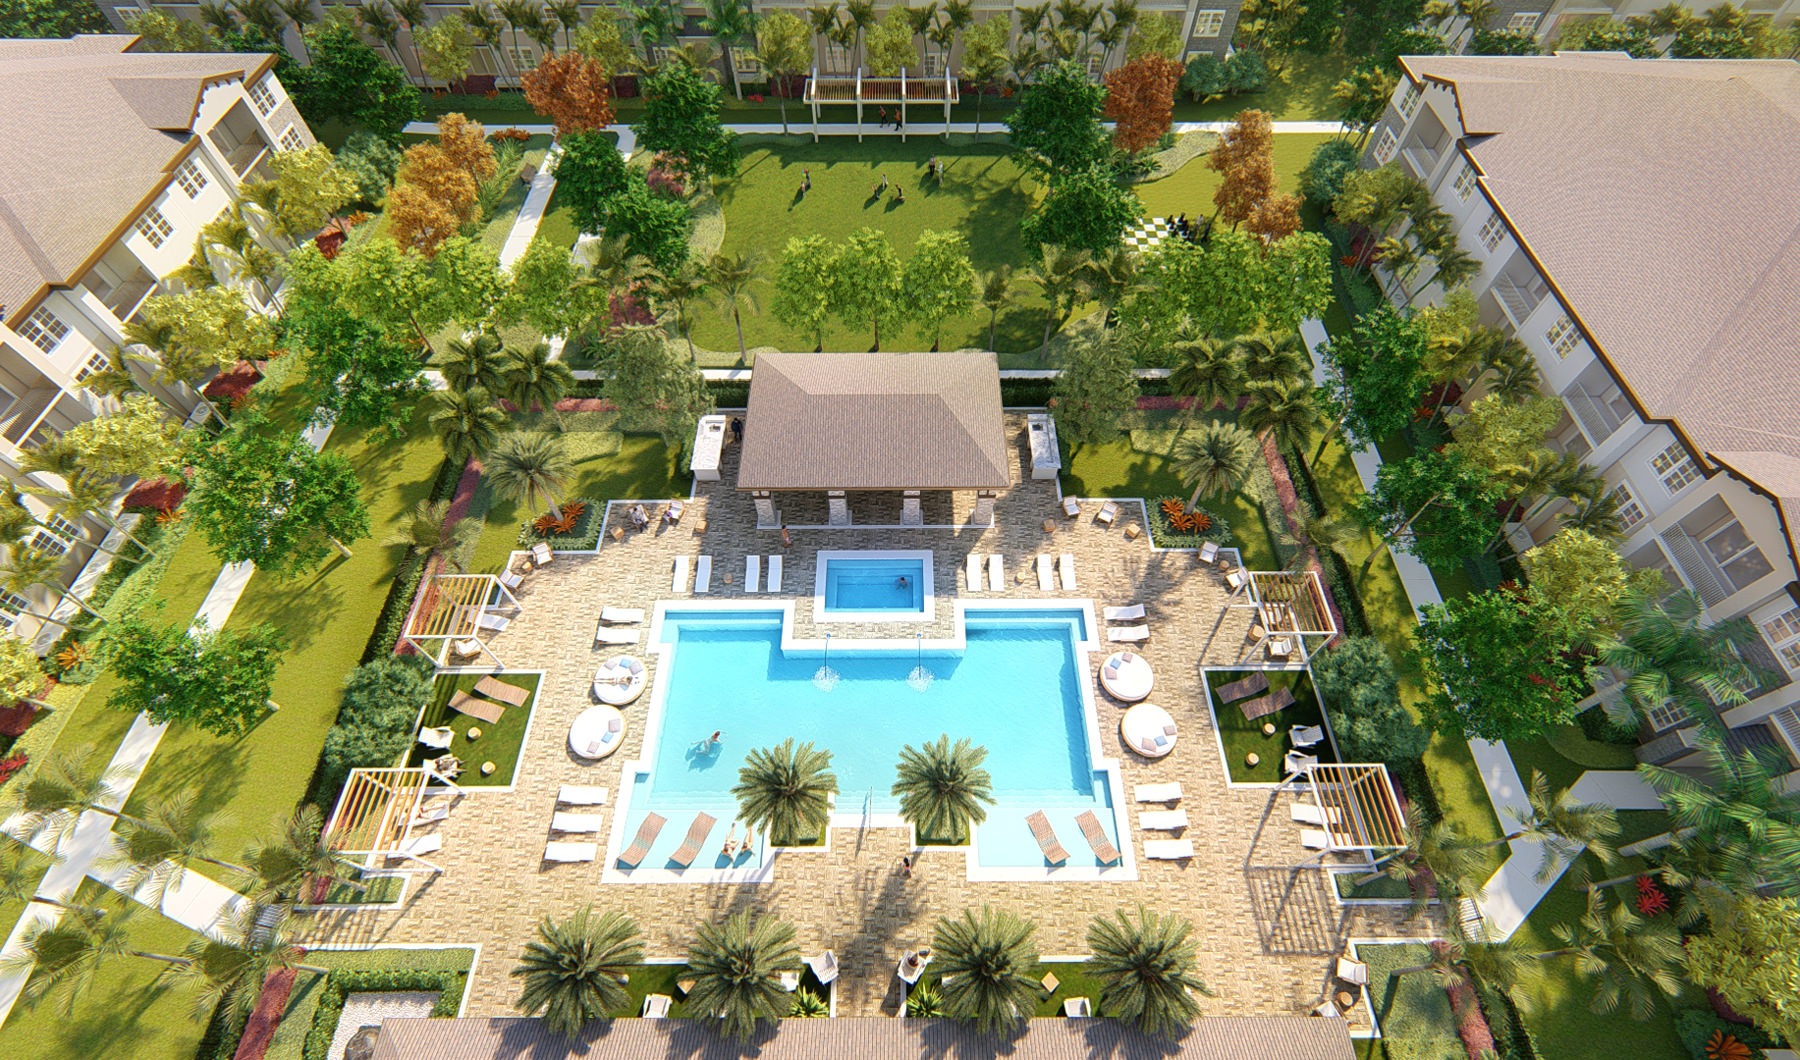 Aerial view of swimming pool with lush landscaping